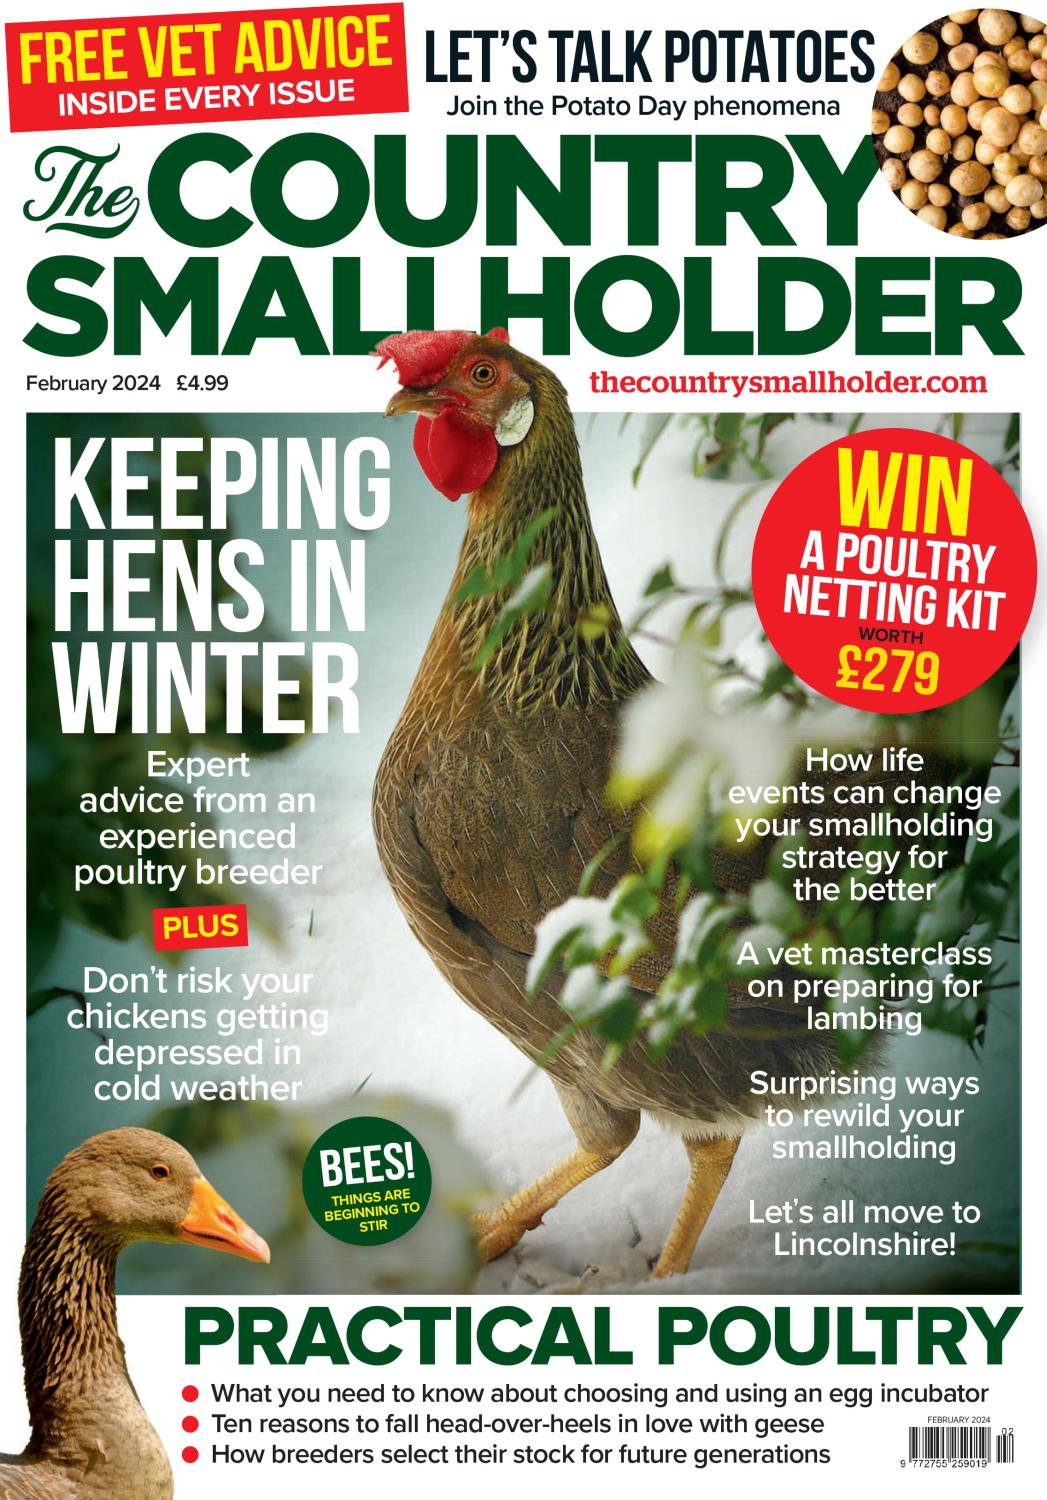 The Country Smallholder – February 2024